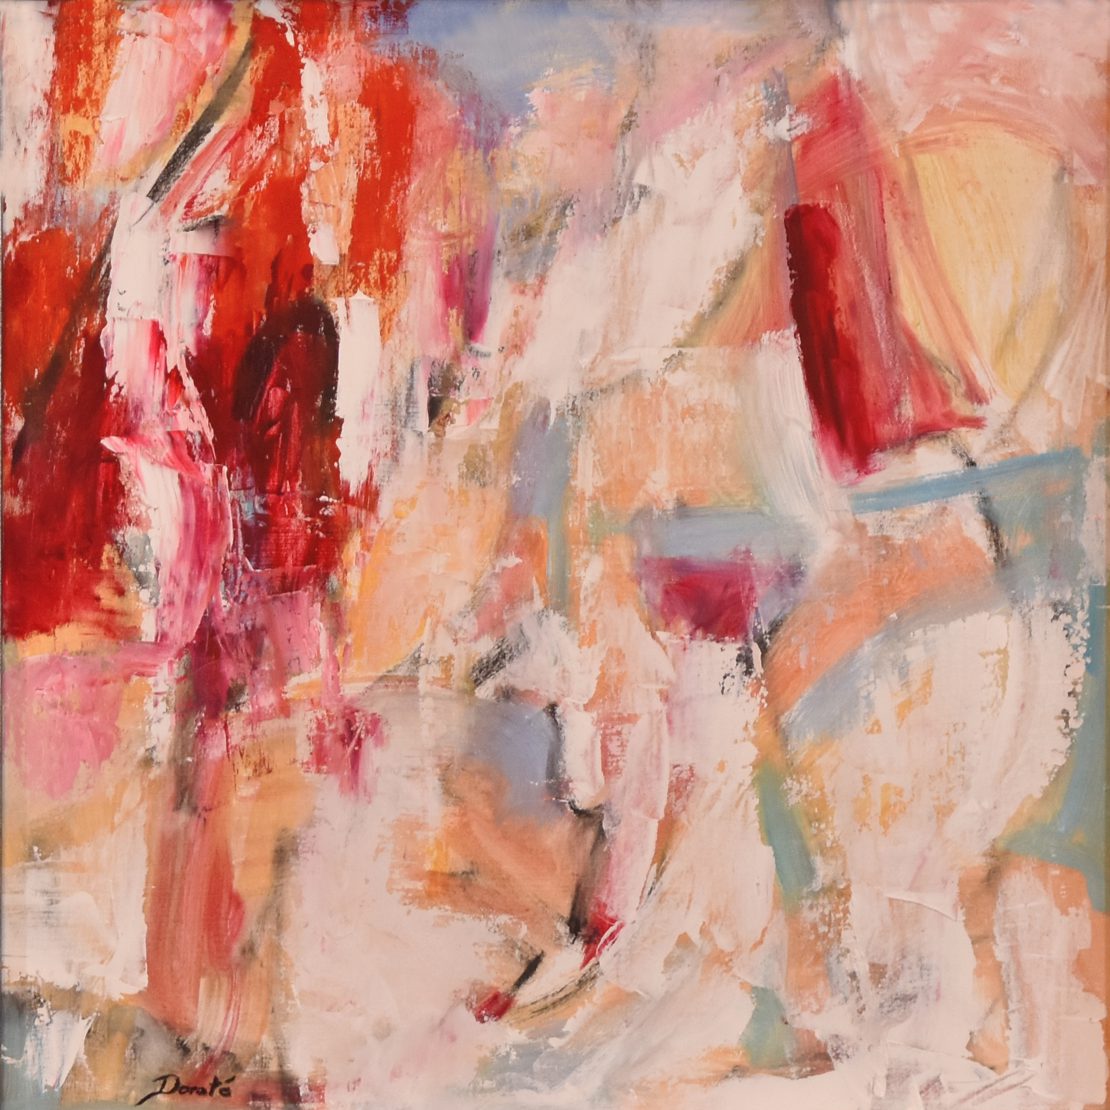 Original Abstract Artwork by Dorate, "Ladies in Red"